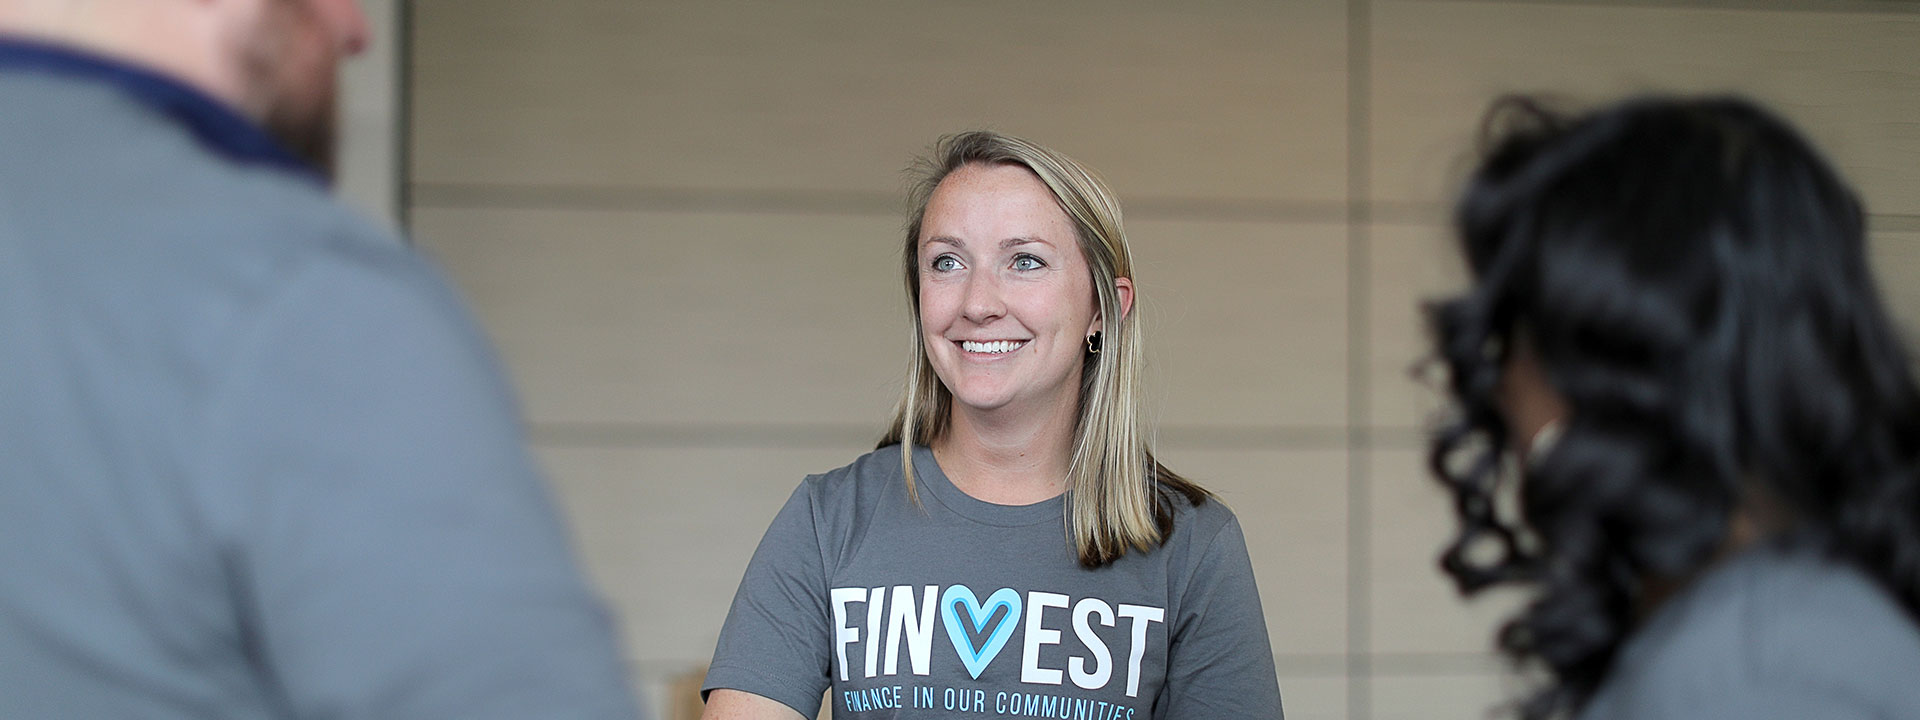 Shannon talking to colleagues while wearing a FINVEST shirt